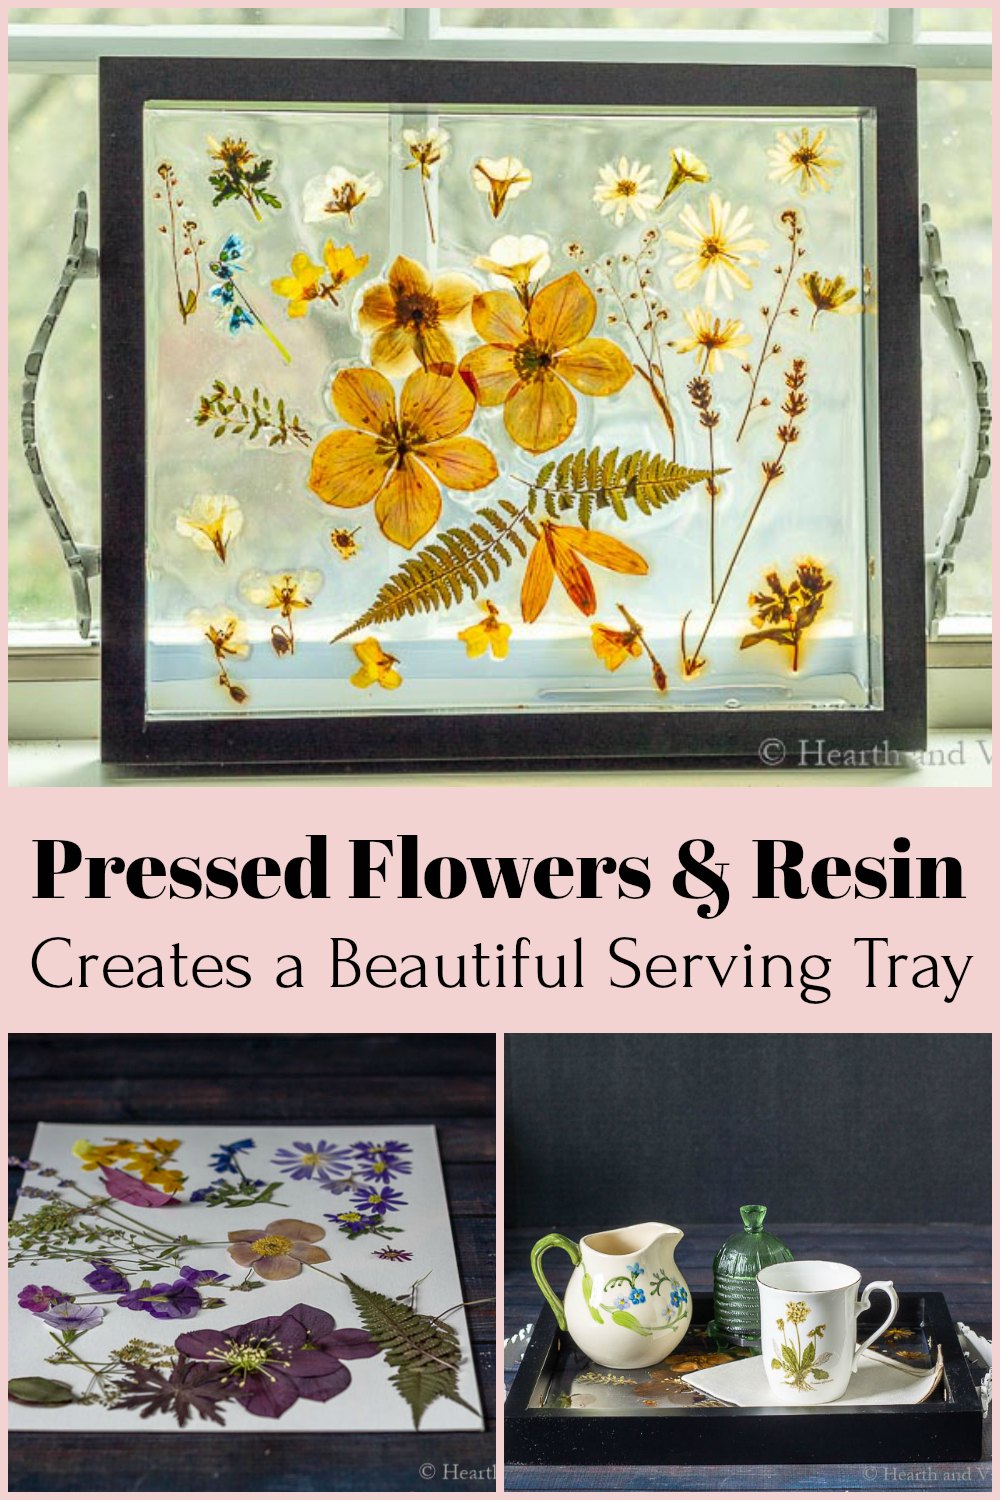 3 images...Pressed flower resin tray, pressed flowers, tea set on tray